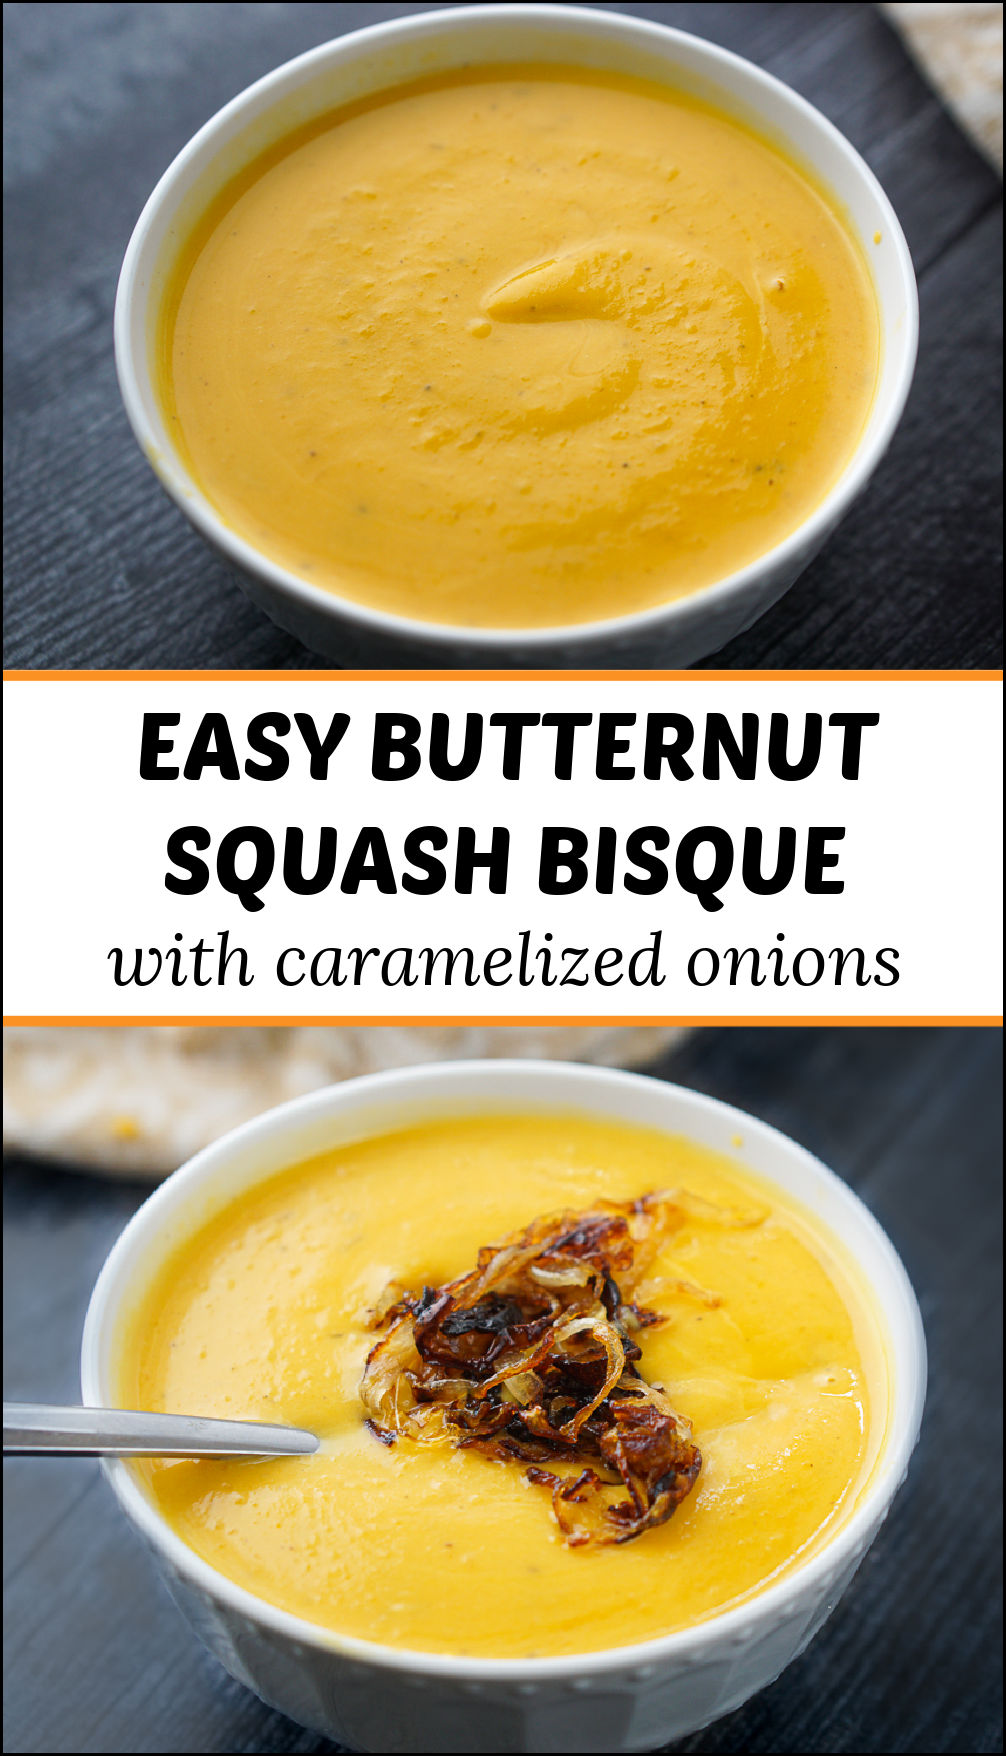 Creamy Butternut Squash Soup with Caramelized Onions in 25 Minutes!